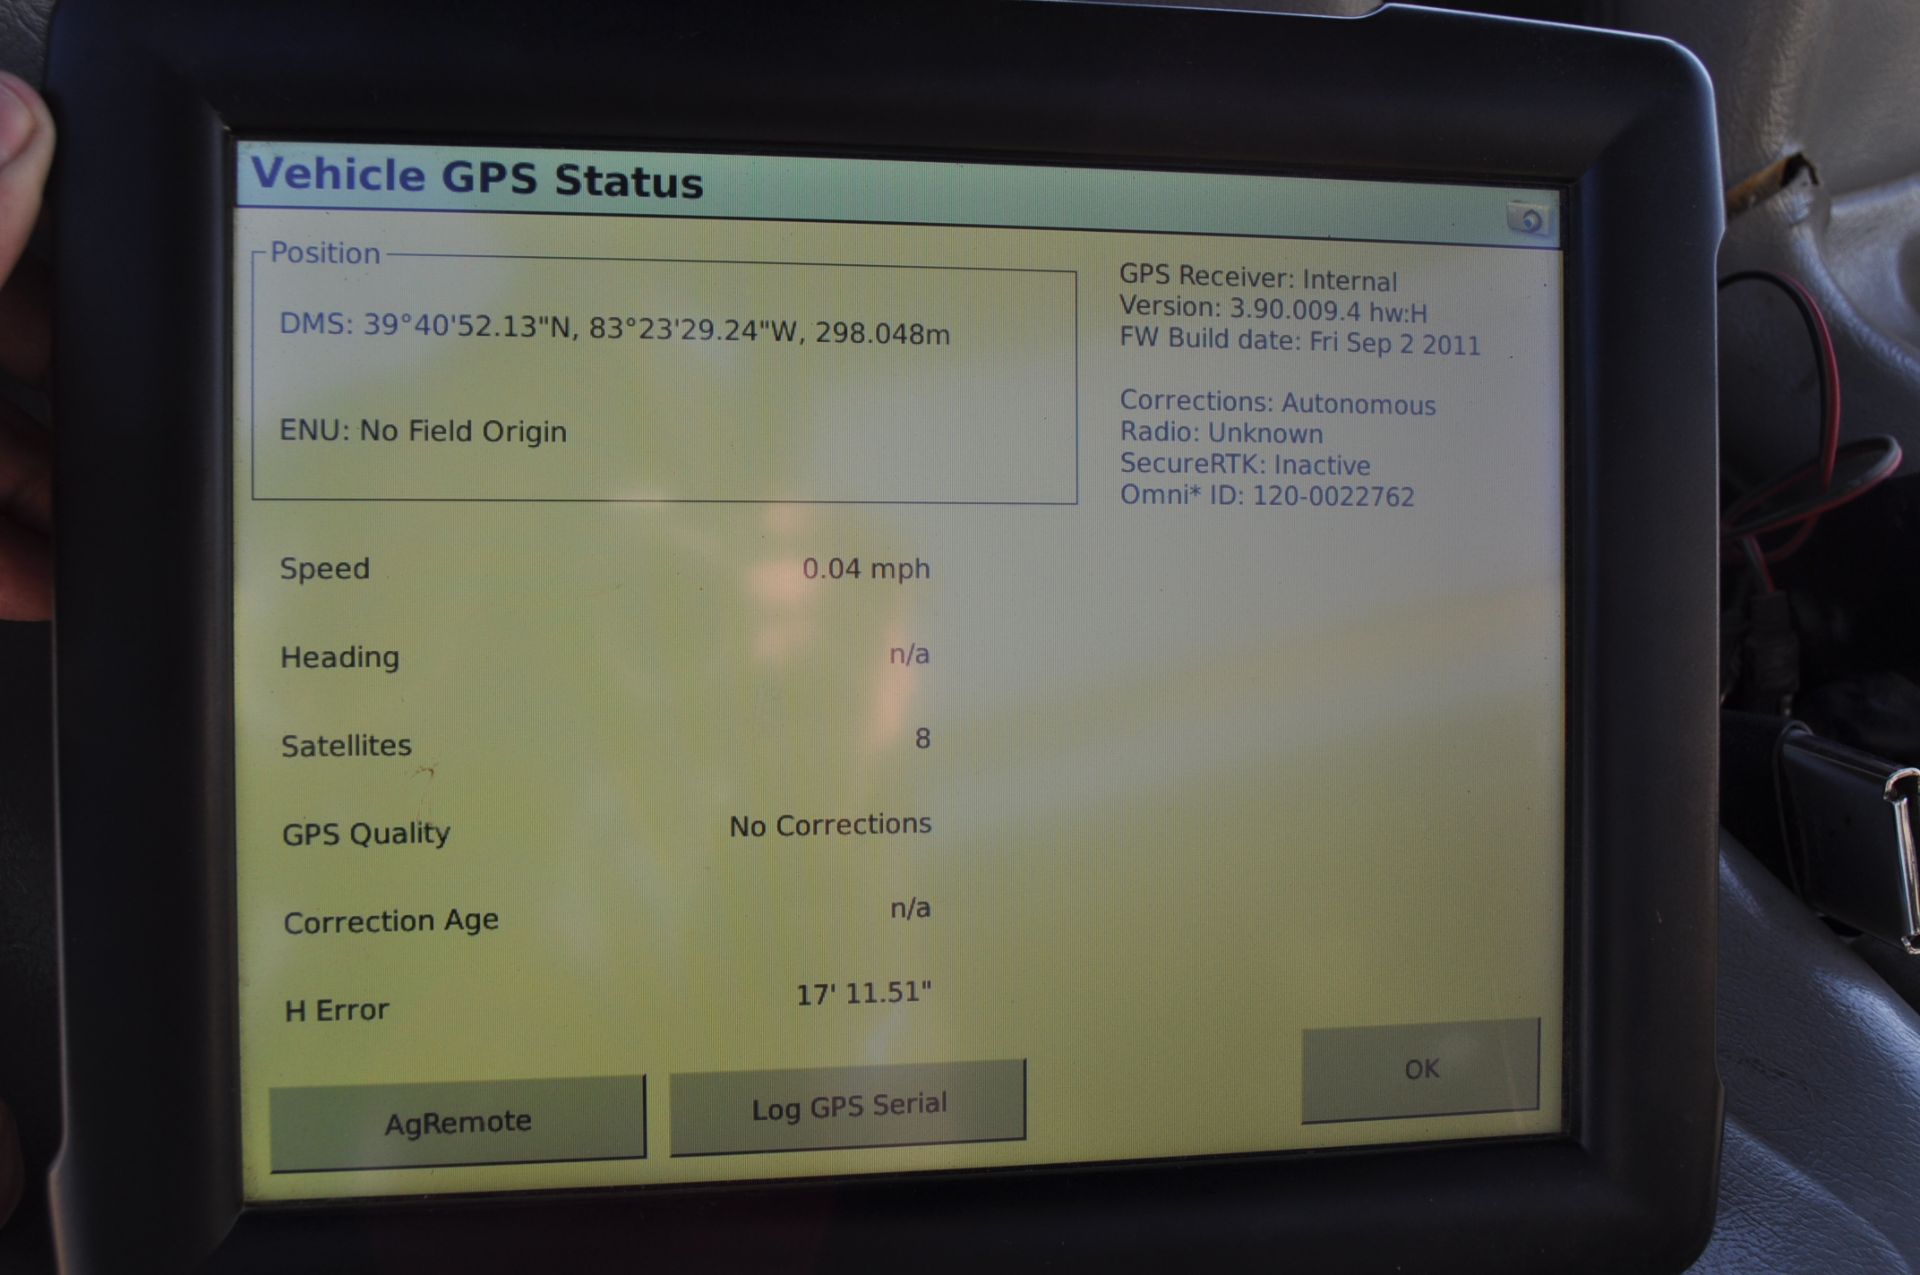 Trimble FMX display unlocked to CenterPoint RTK, OmniSTAR HP/XP/G2 Corrections, and GLONASS - Image 3 of 5